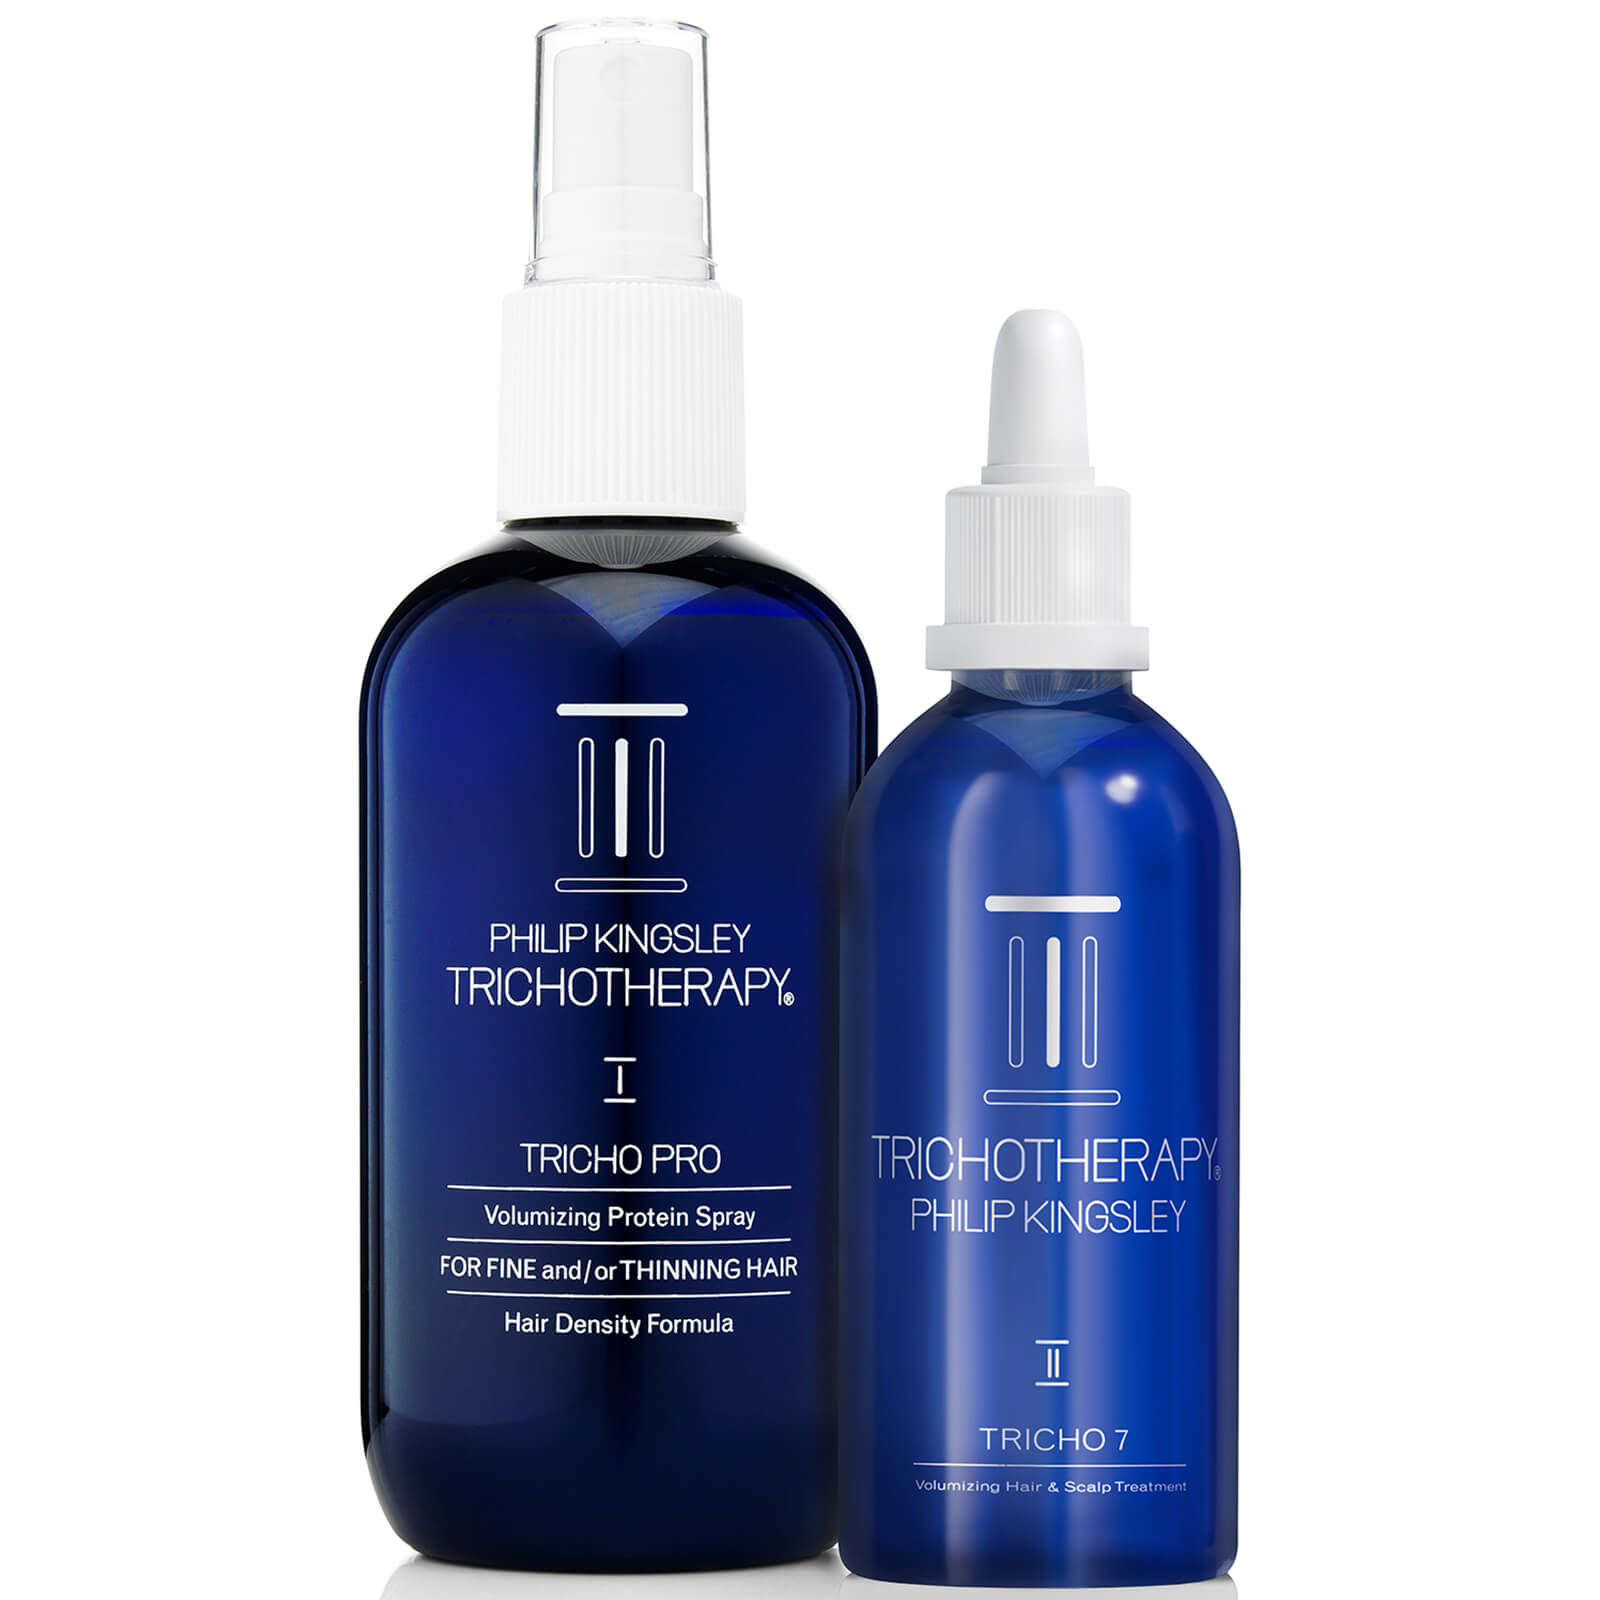 Philip Kingsley Trichotherapy Set